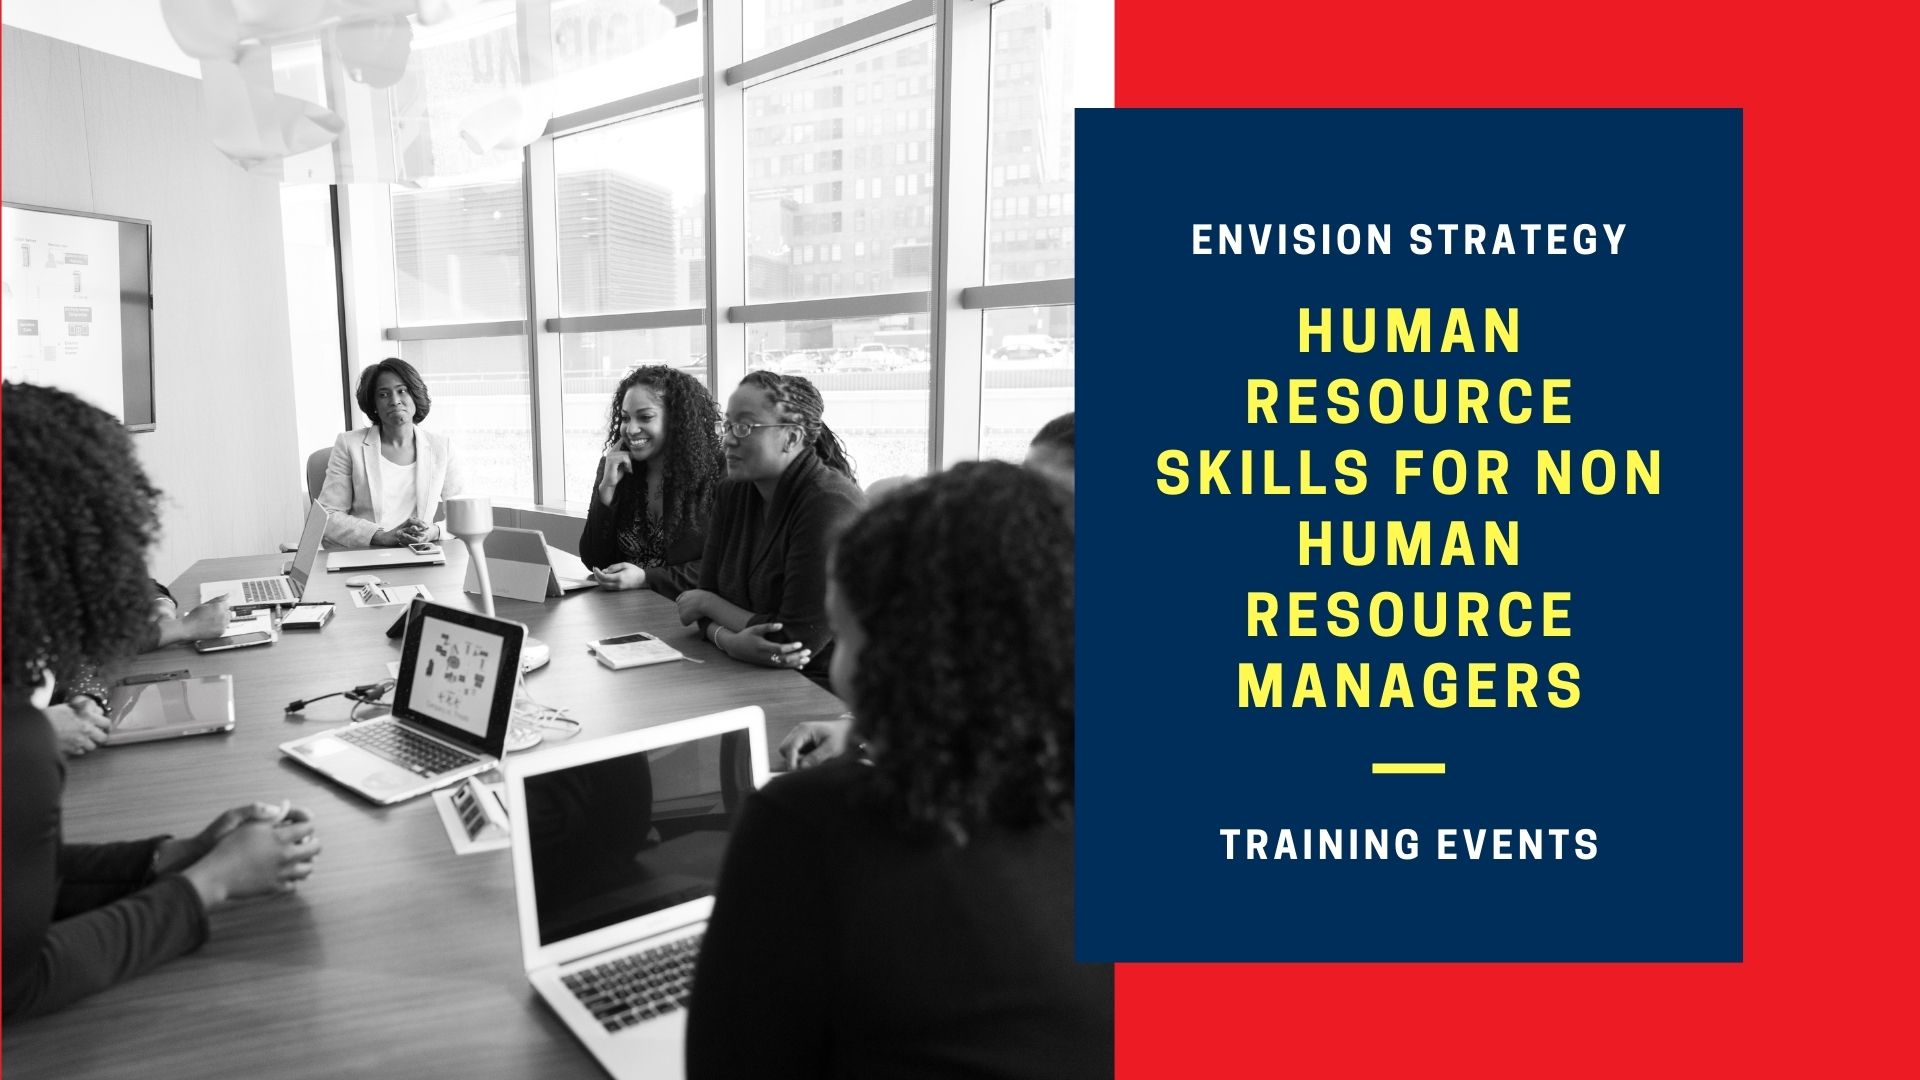 Human Resource Skills For Non Human Resource Managers